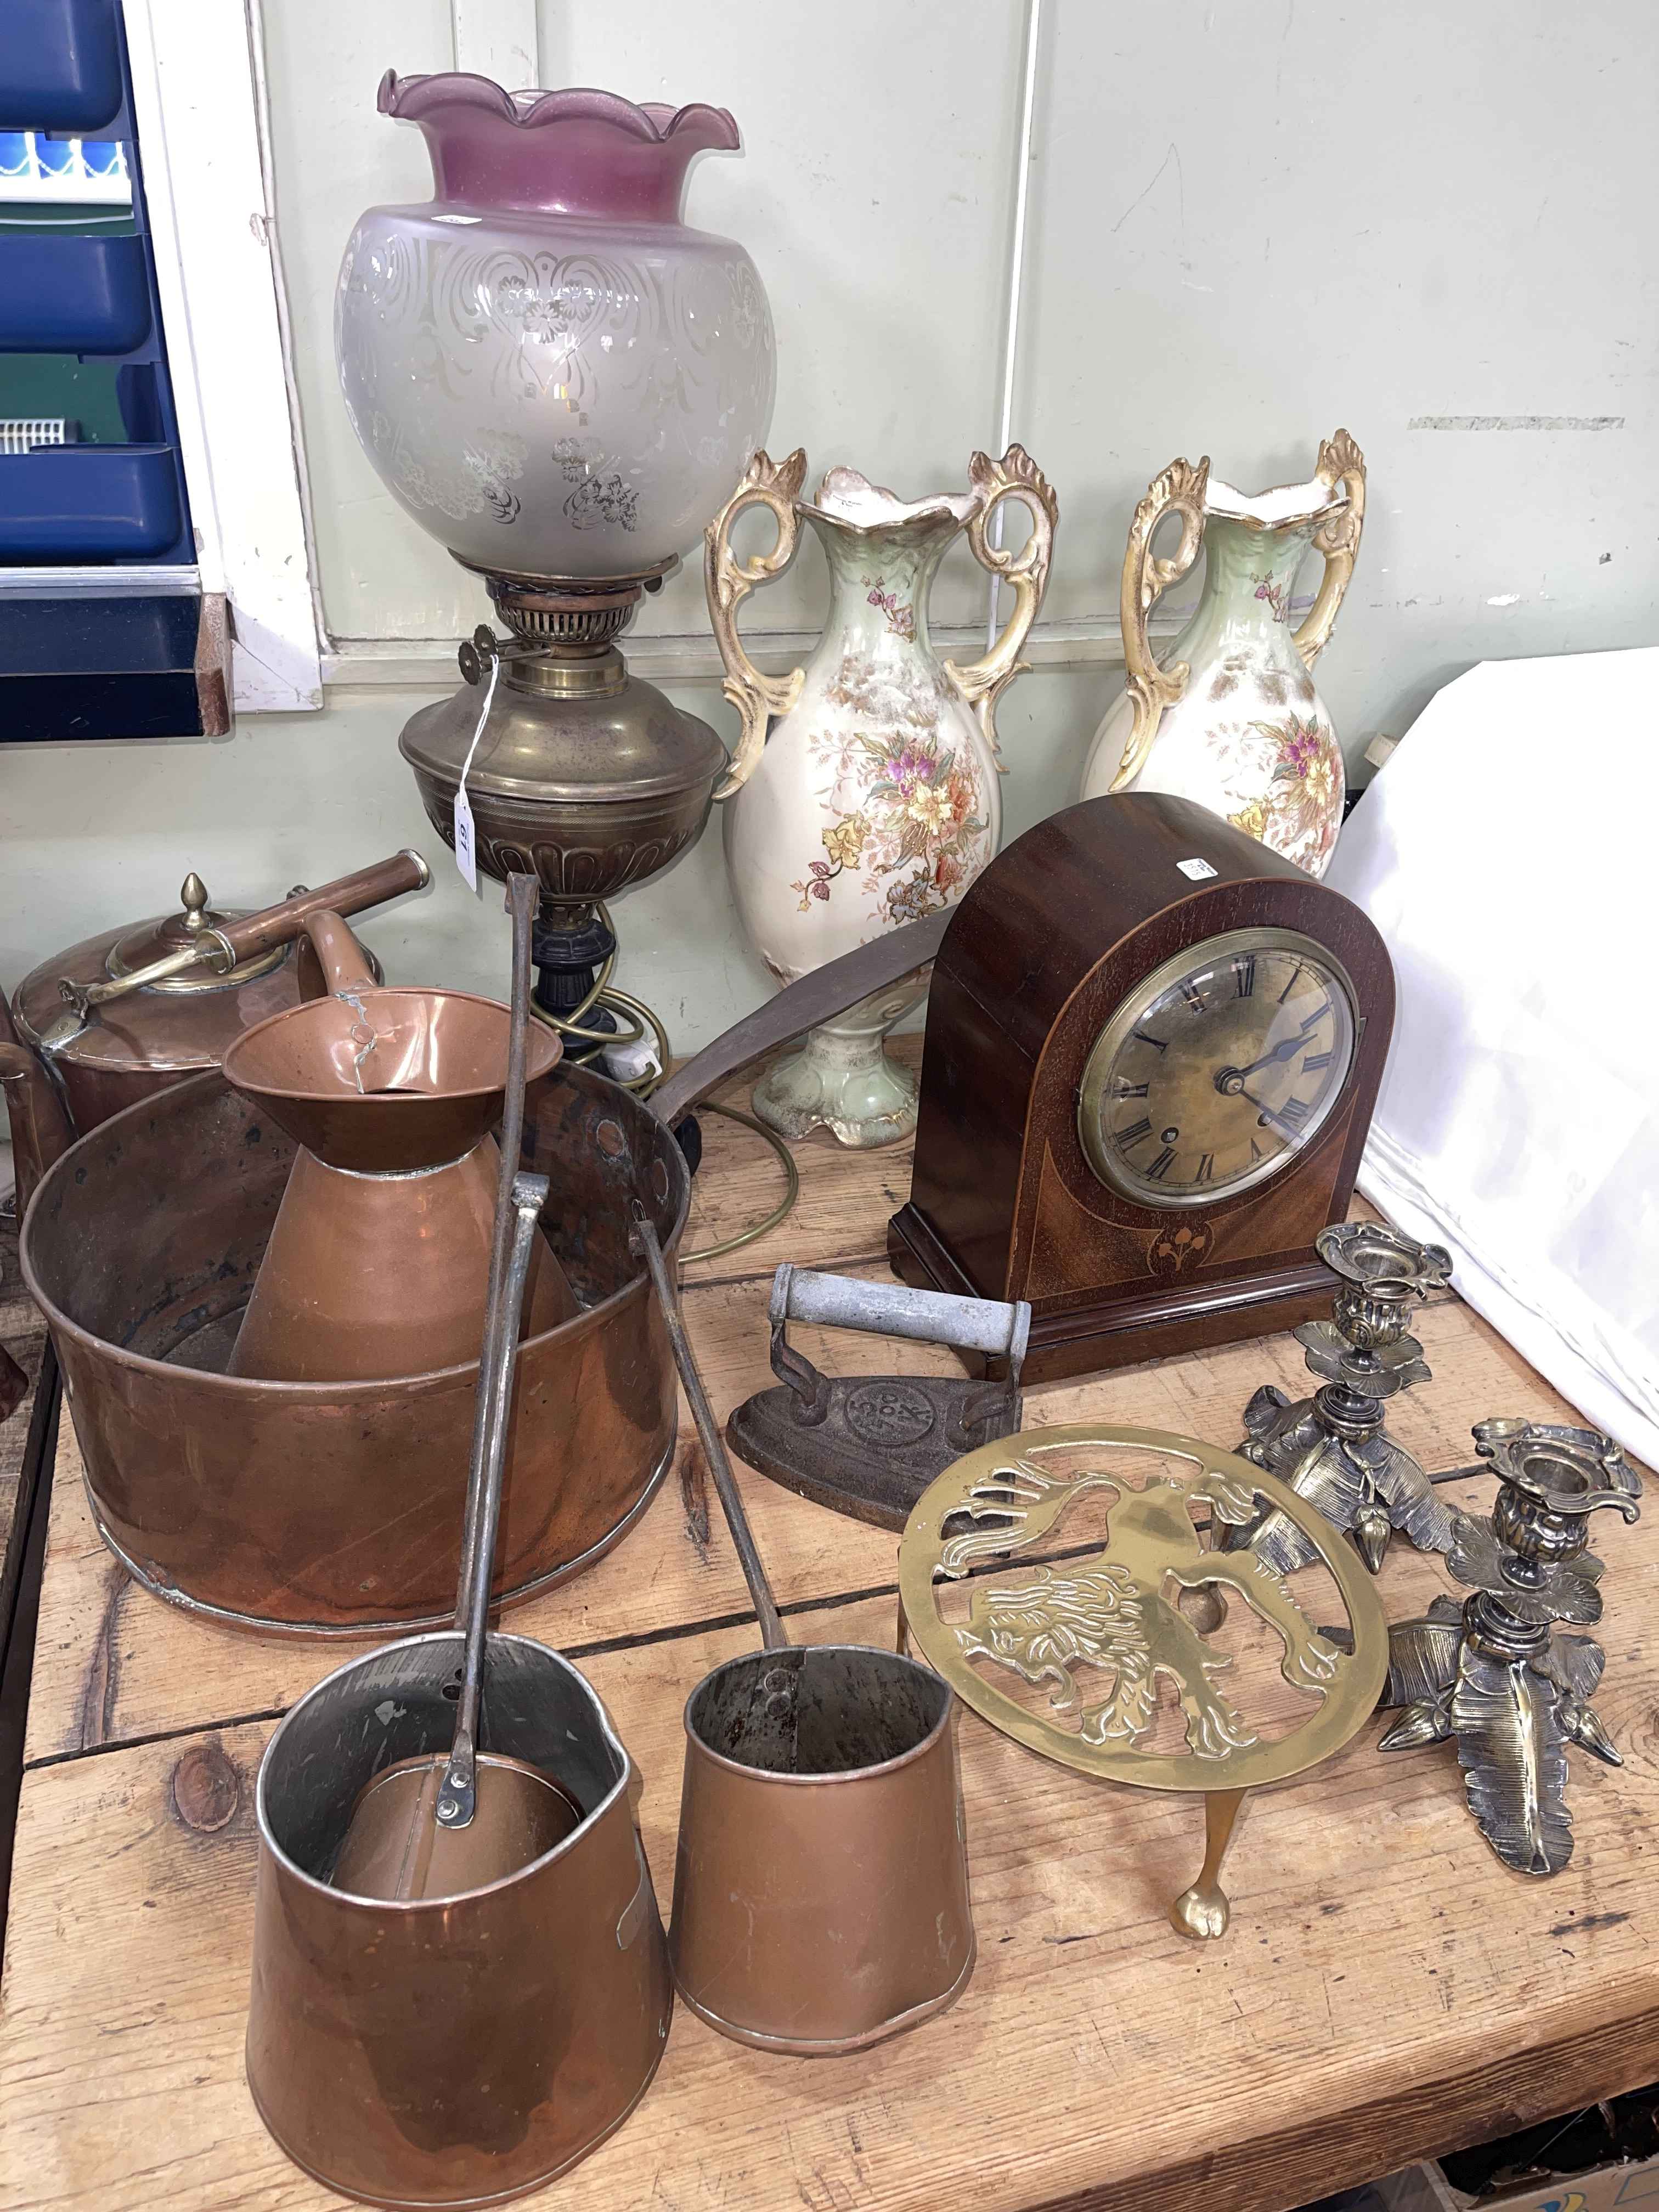 Edwardian inlaid mantel clock, Victorian etched glass oil lamp, copper jam pan, copper kettle,